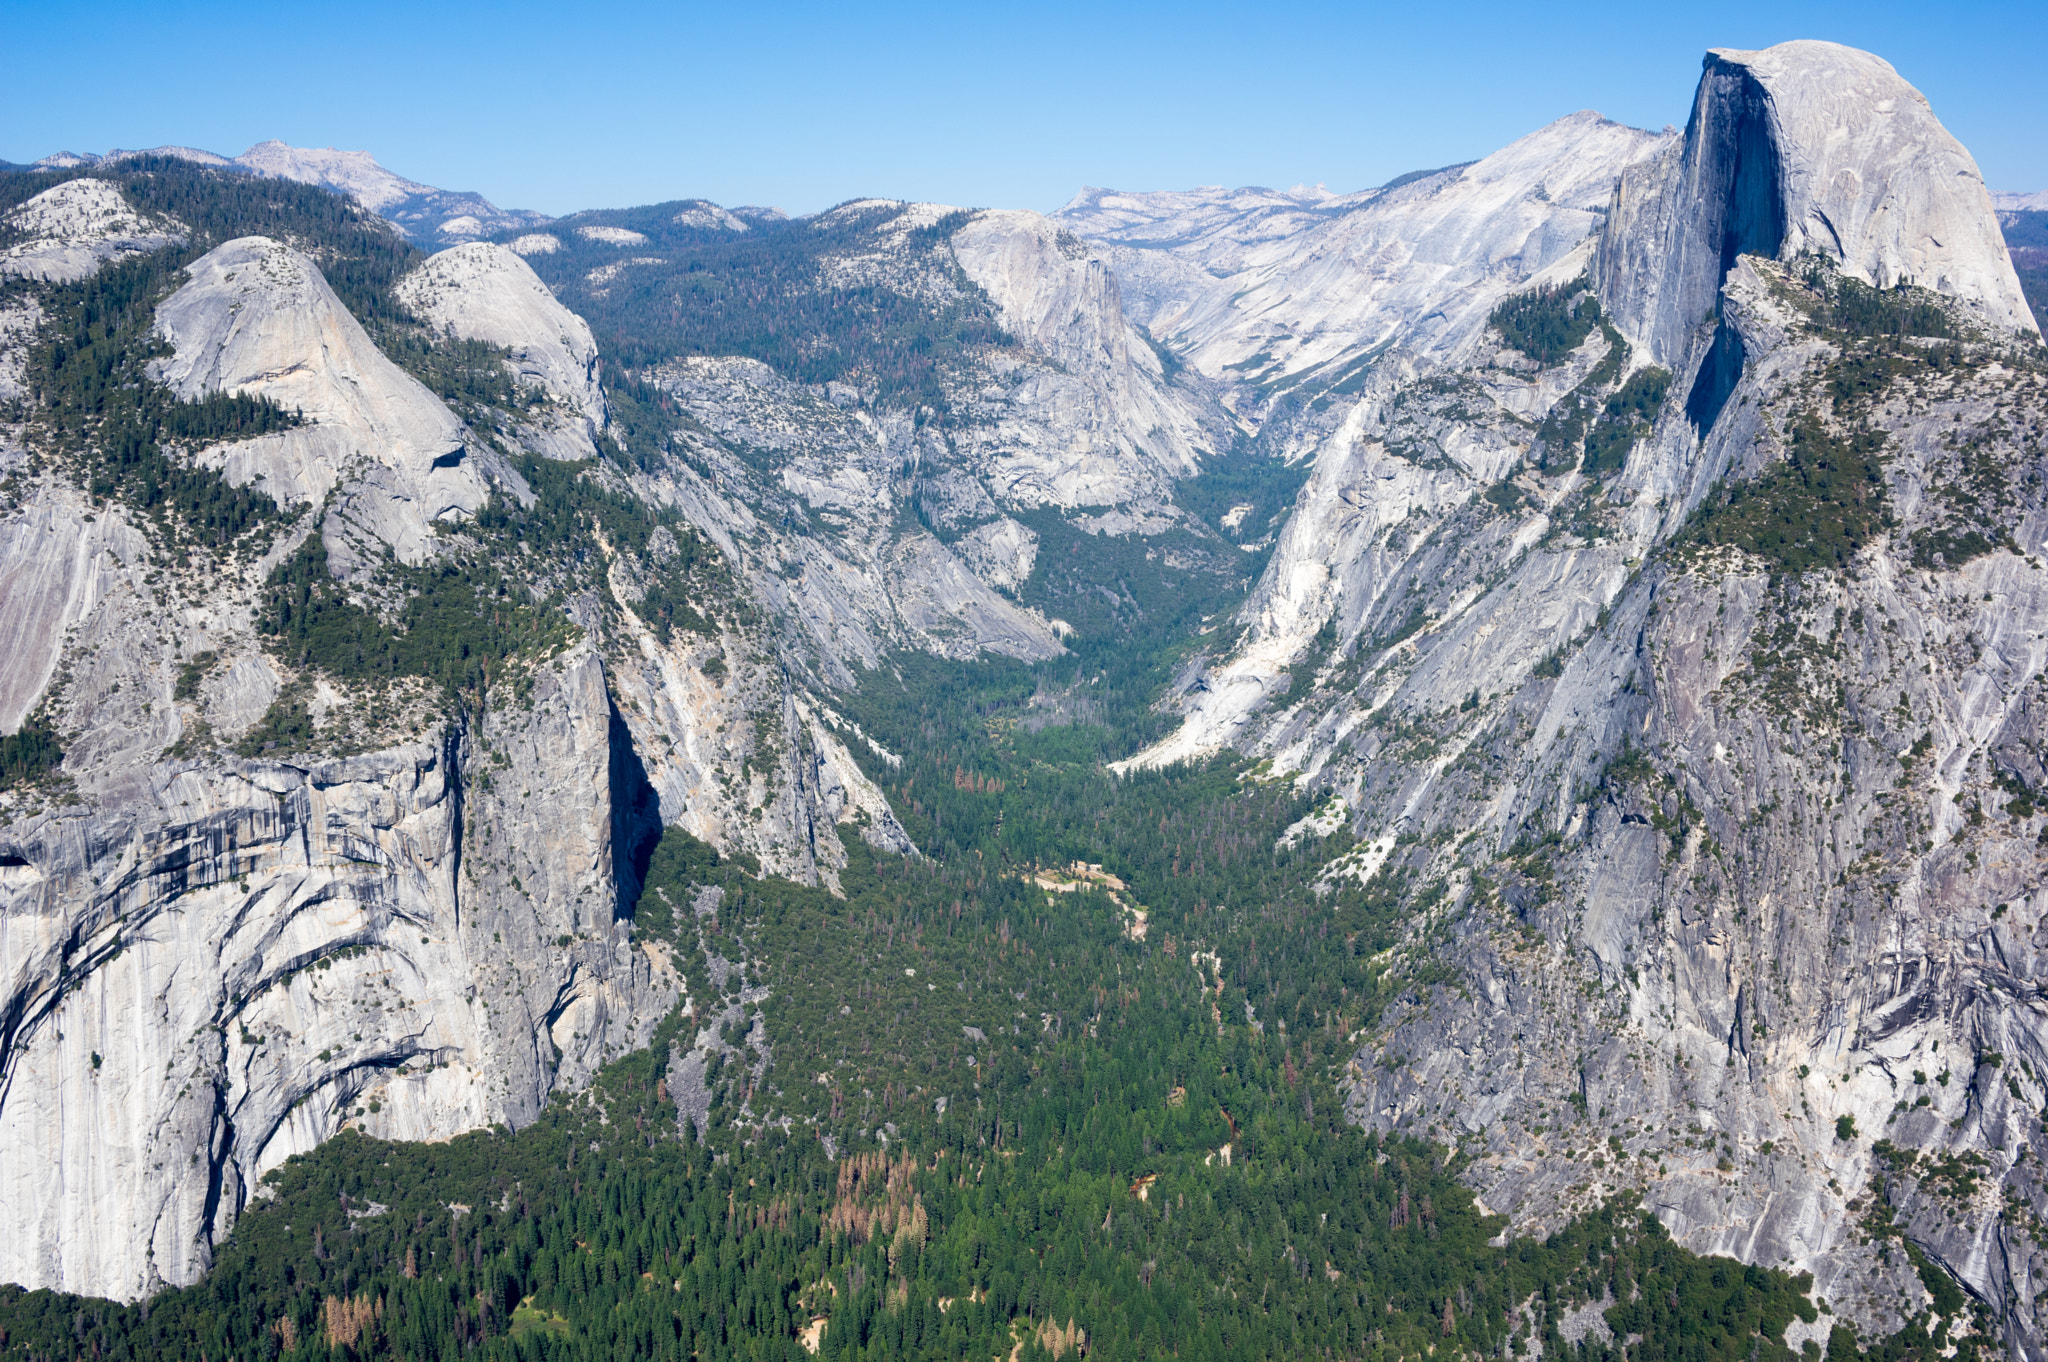 Pentax K-3 II + HD Pentax DA 21mm F3.2 AL Limited sample photo. Half dome and yosemite valley from glacier point photography